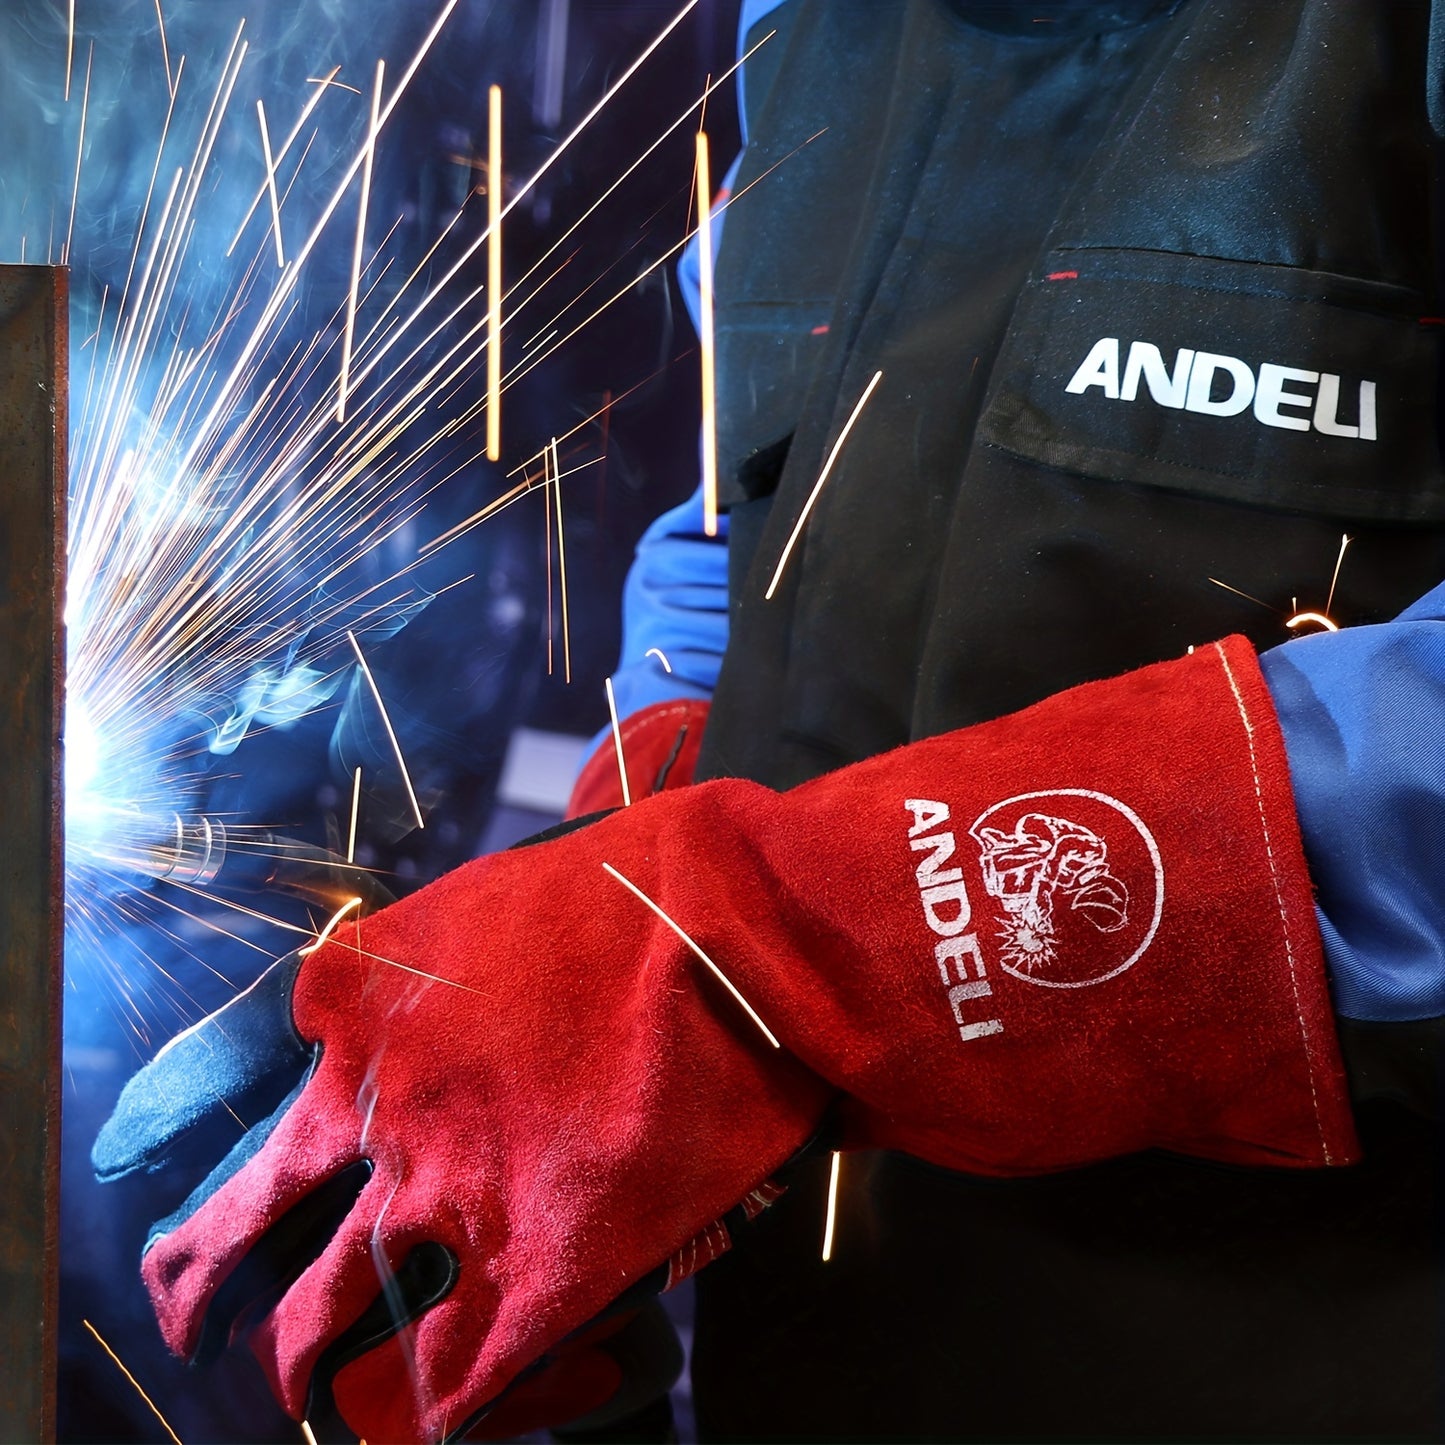 1 Pair ANDELI 14inch Welding Gloves, 572°F TIG/Mig/Welding Gloves Heat/Fire Resistant, BBQ/Oven,Grill,Fireplace Gloves With Extra Long Sleeve